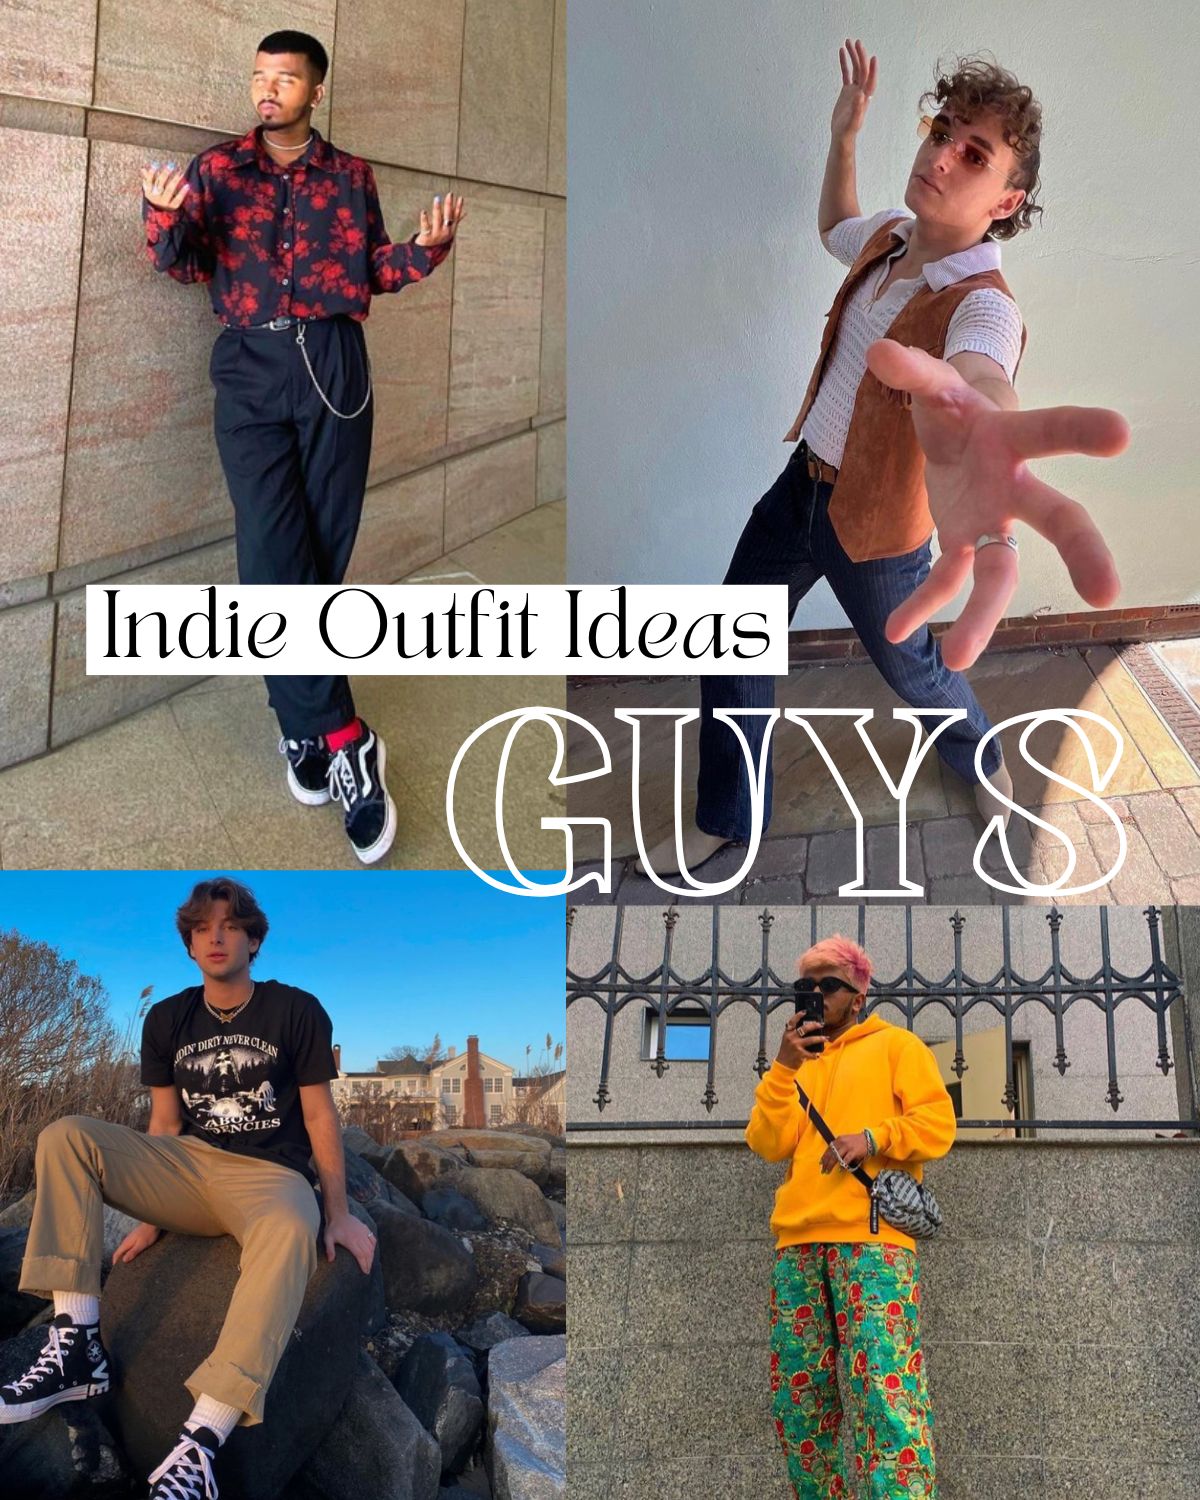 Four men in cool indie outfits